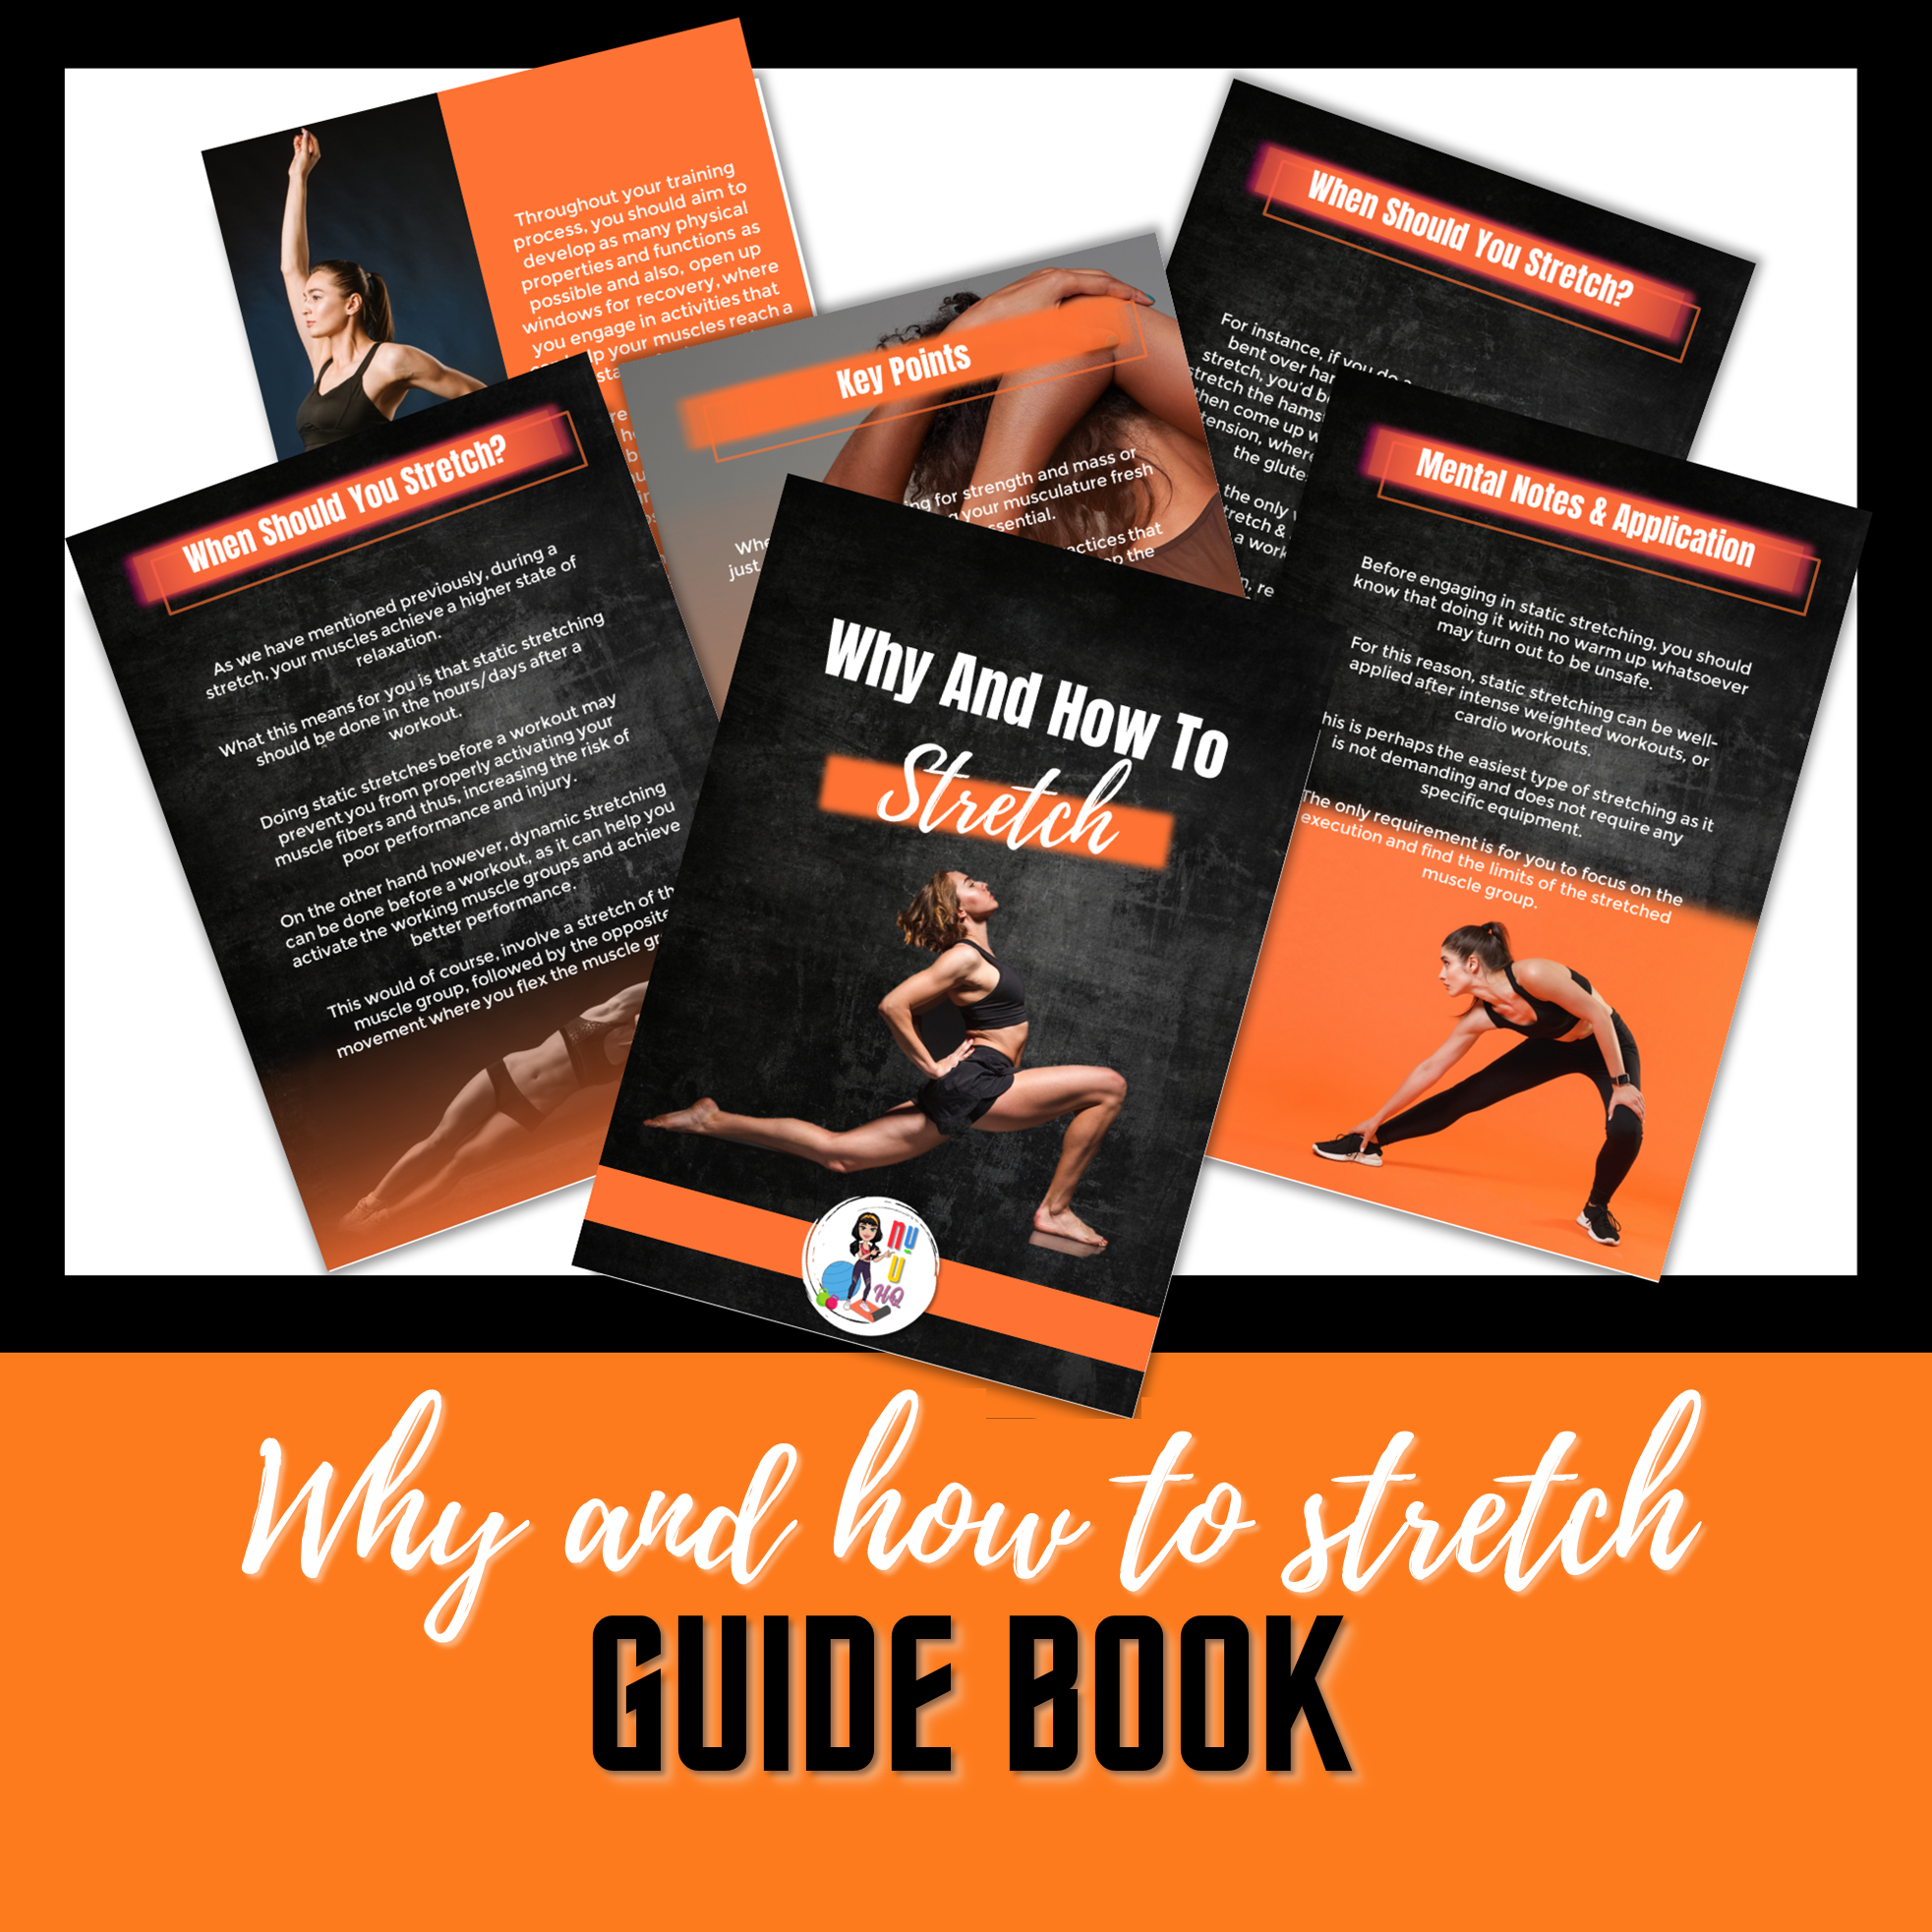 Why and how to stretch Guide